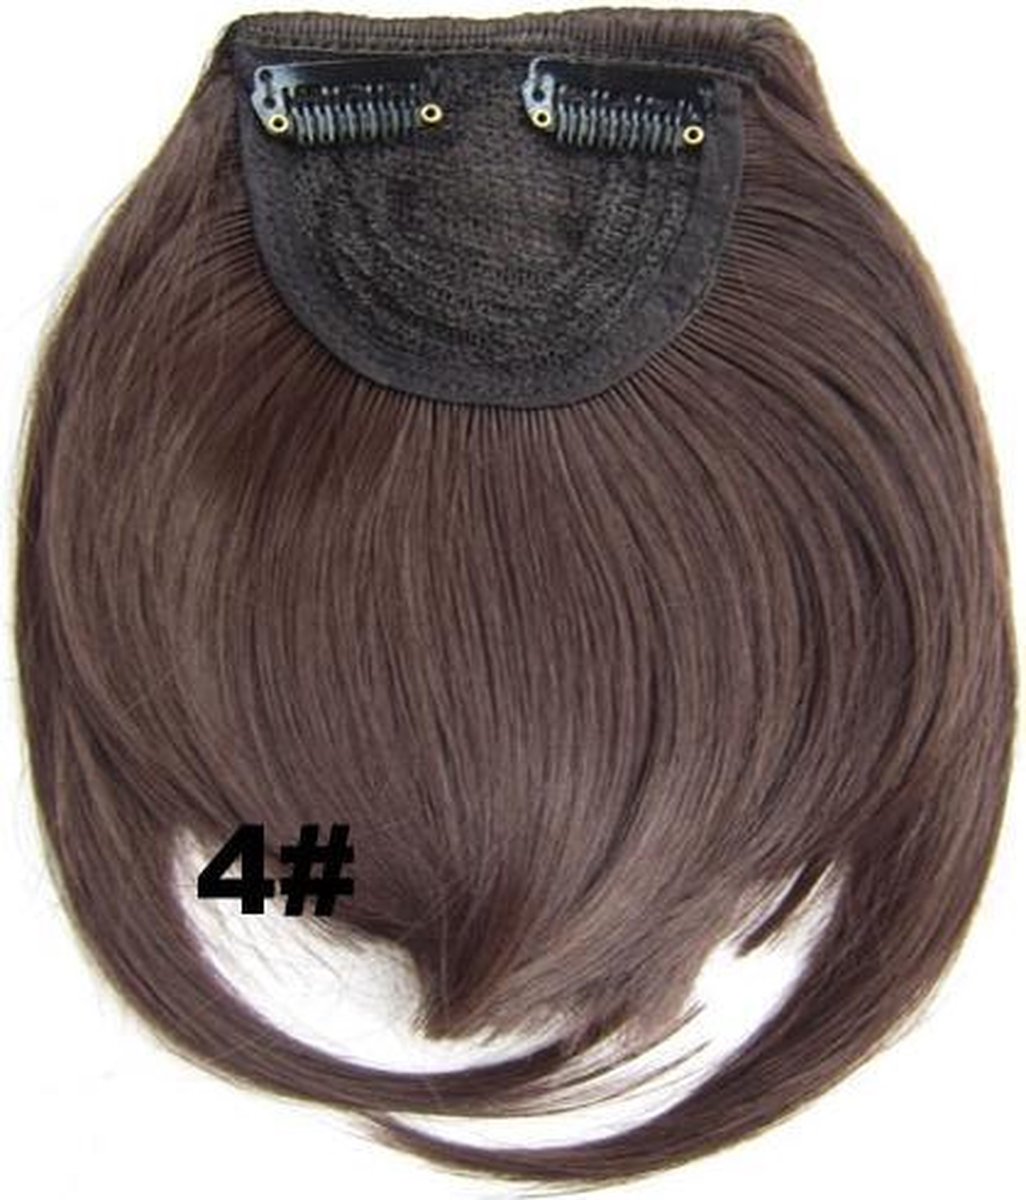 Pony hair extension clip in bruin - 4#